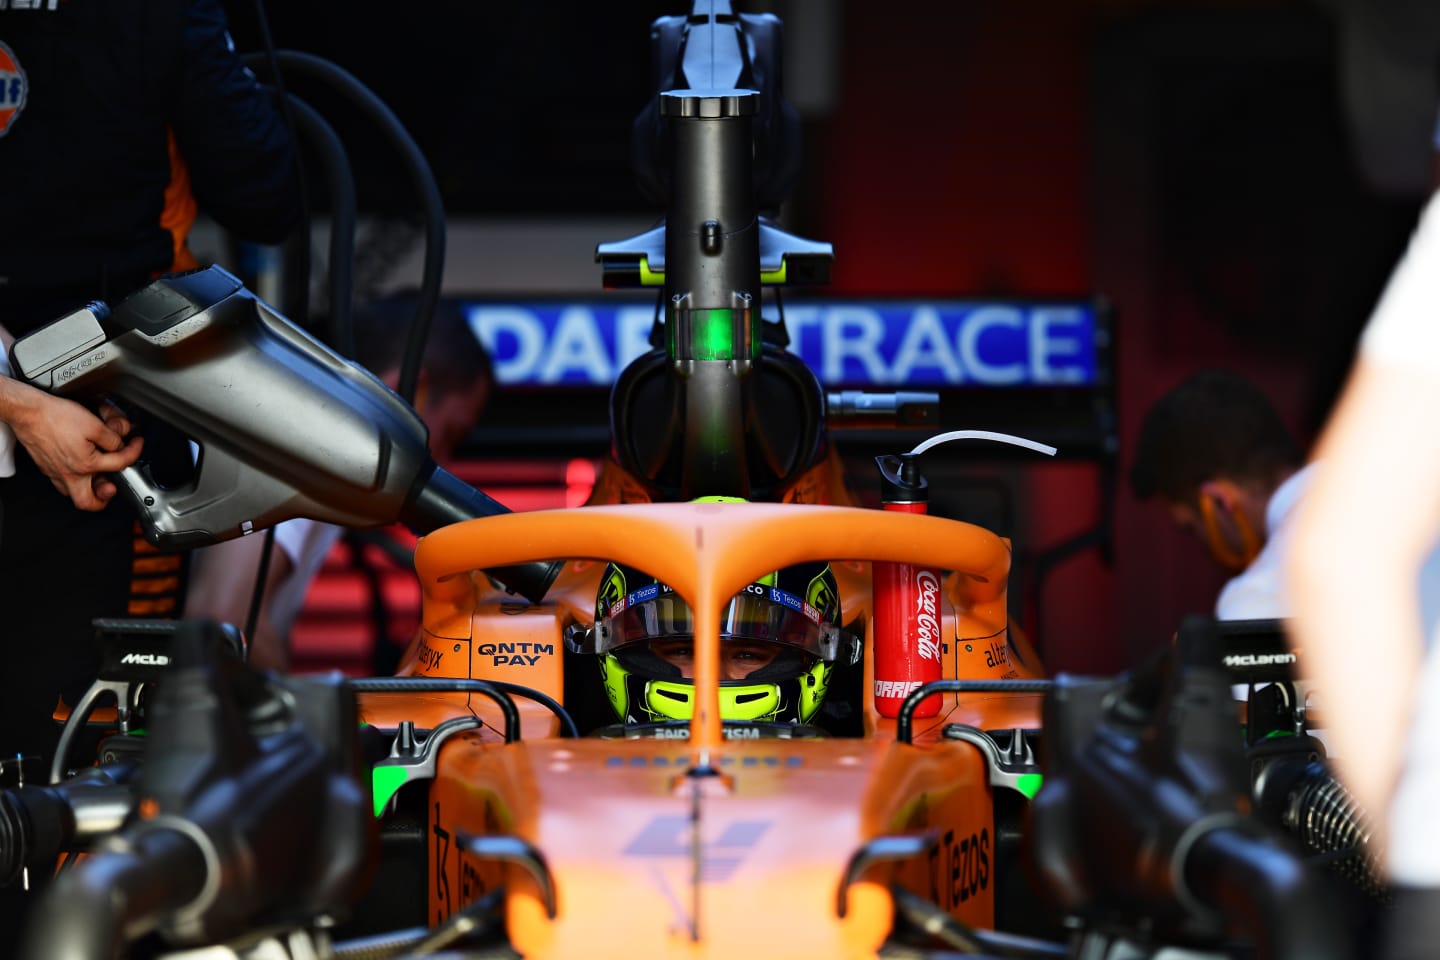 DOHA, QATAR - NOVEMBER 20: Lando Norris of Great Britain and McLaren F1 prepares to drive in the garage during final practice ahead of the F1 Grand Prix of Qatar at Losail International Circuit on November 20, 2021 in Doha, Qatar. (Photo by Mario Renzi - Formula 1/Formula 1 via Getty Images)